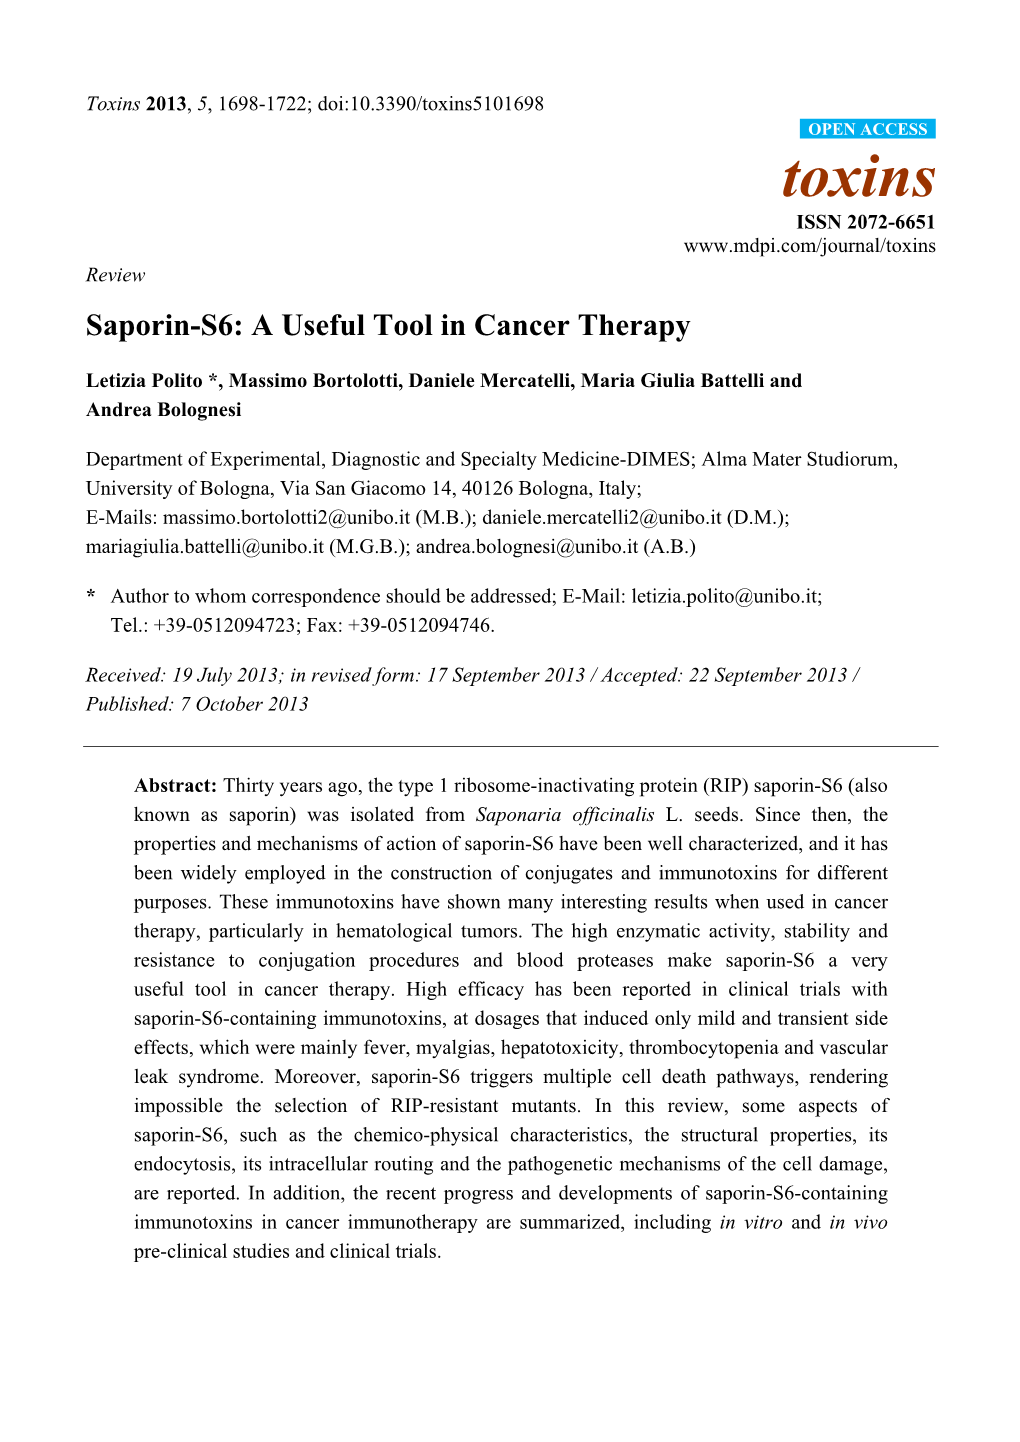 Saporin-S6: a Useful Tool in Cancer Therapy